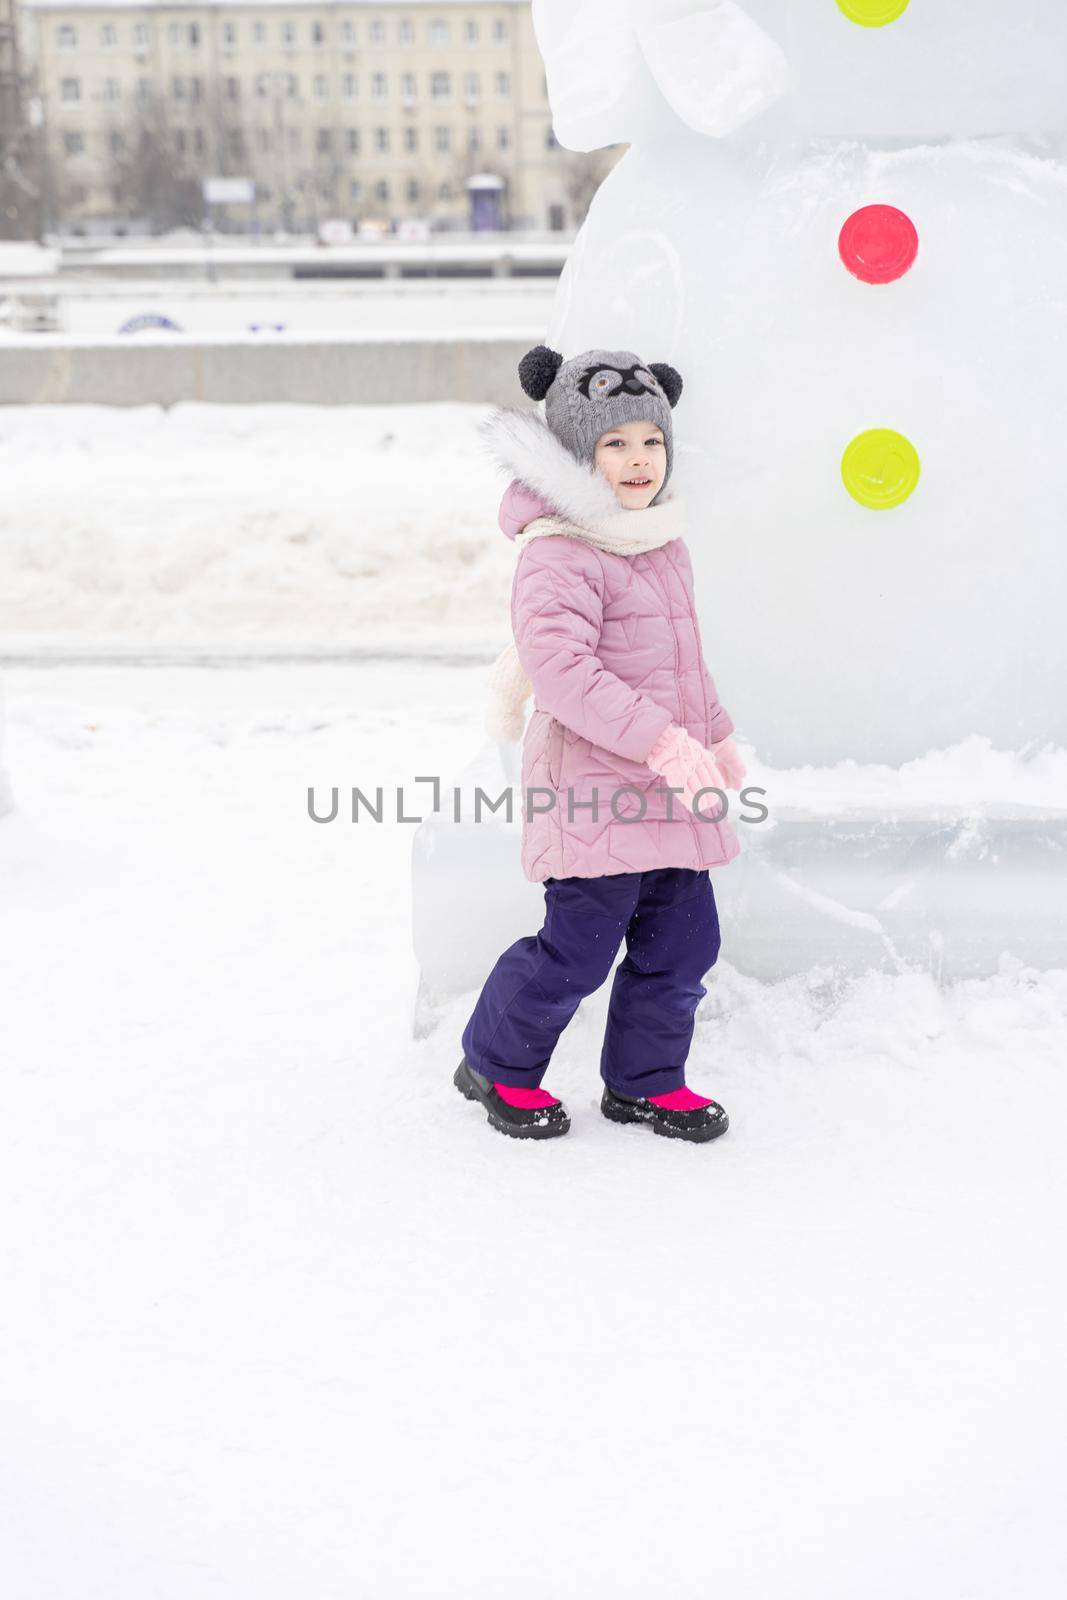 playful child girl happy in snow town on winter day by Lena_Ogurtsova